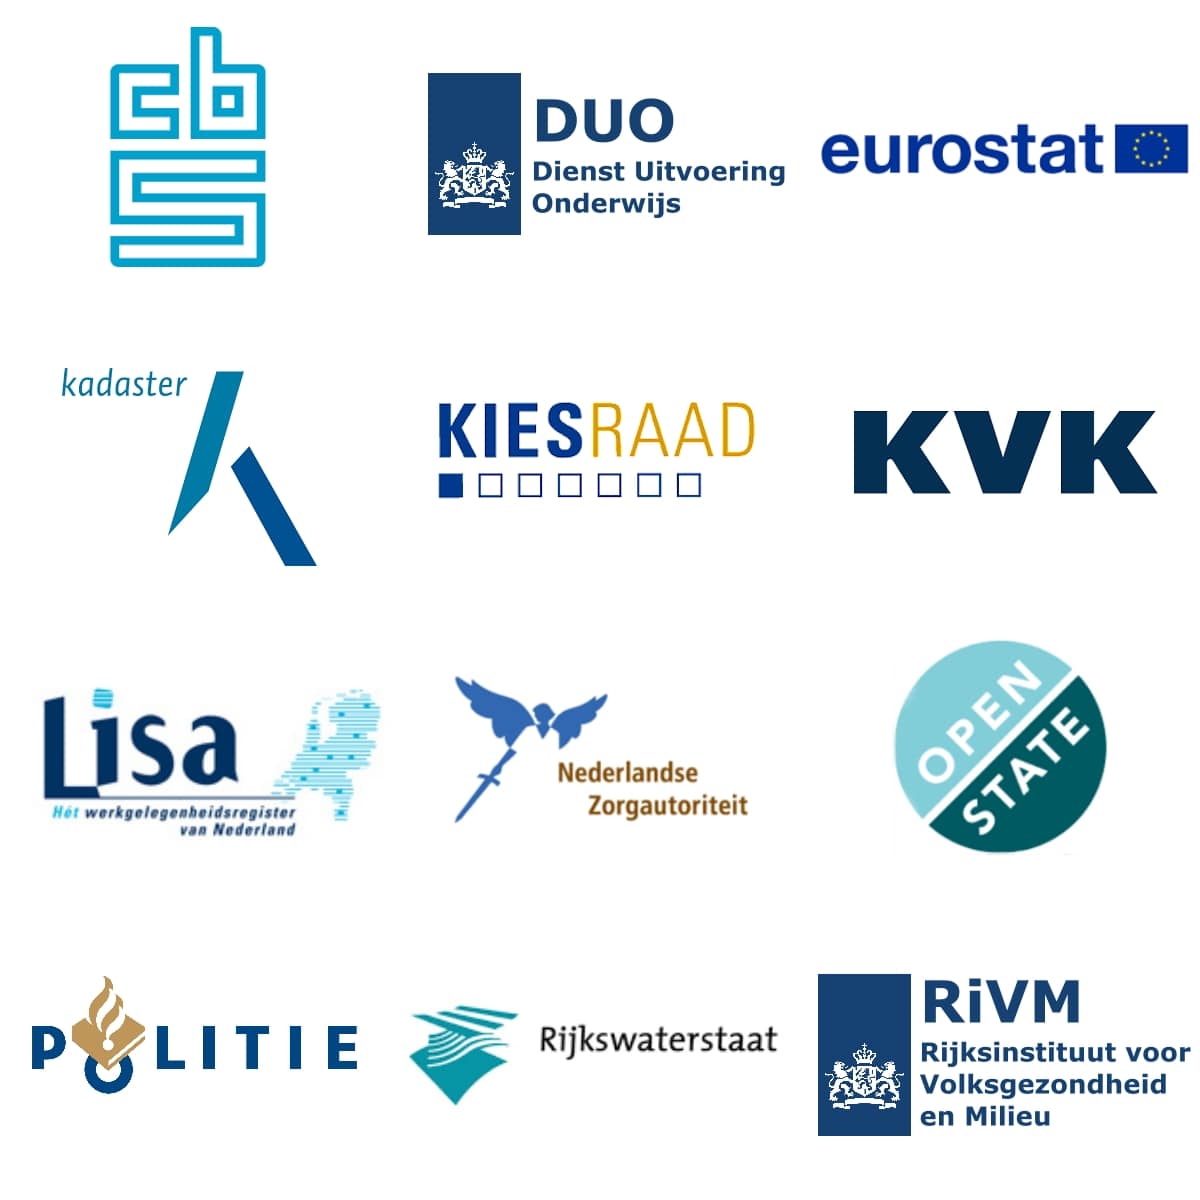 Logos of a number of well-known Dutch open data providers.